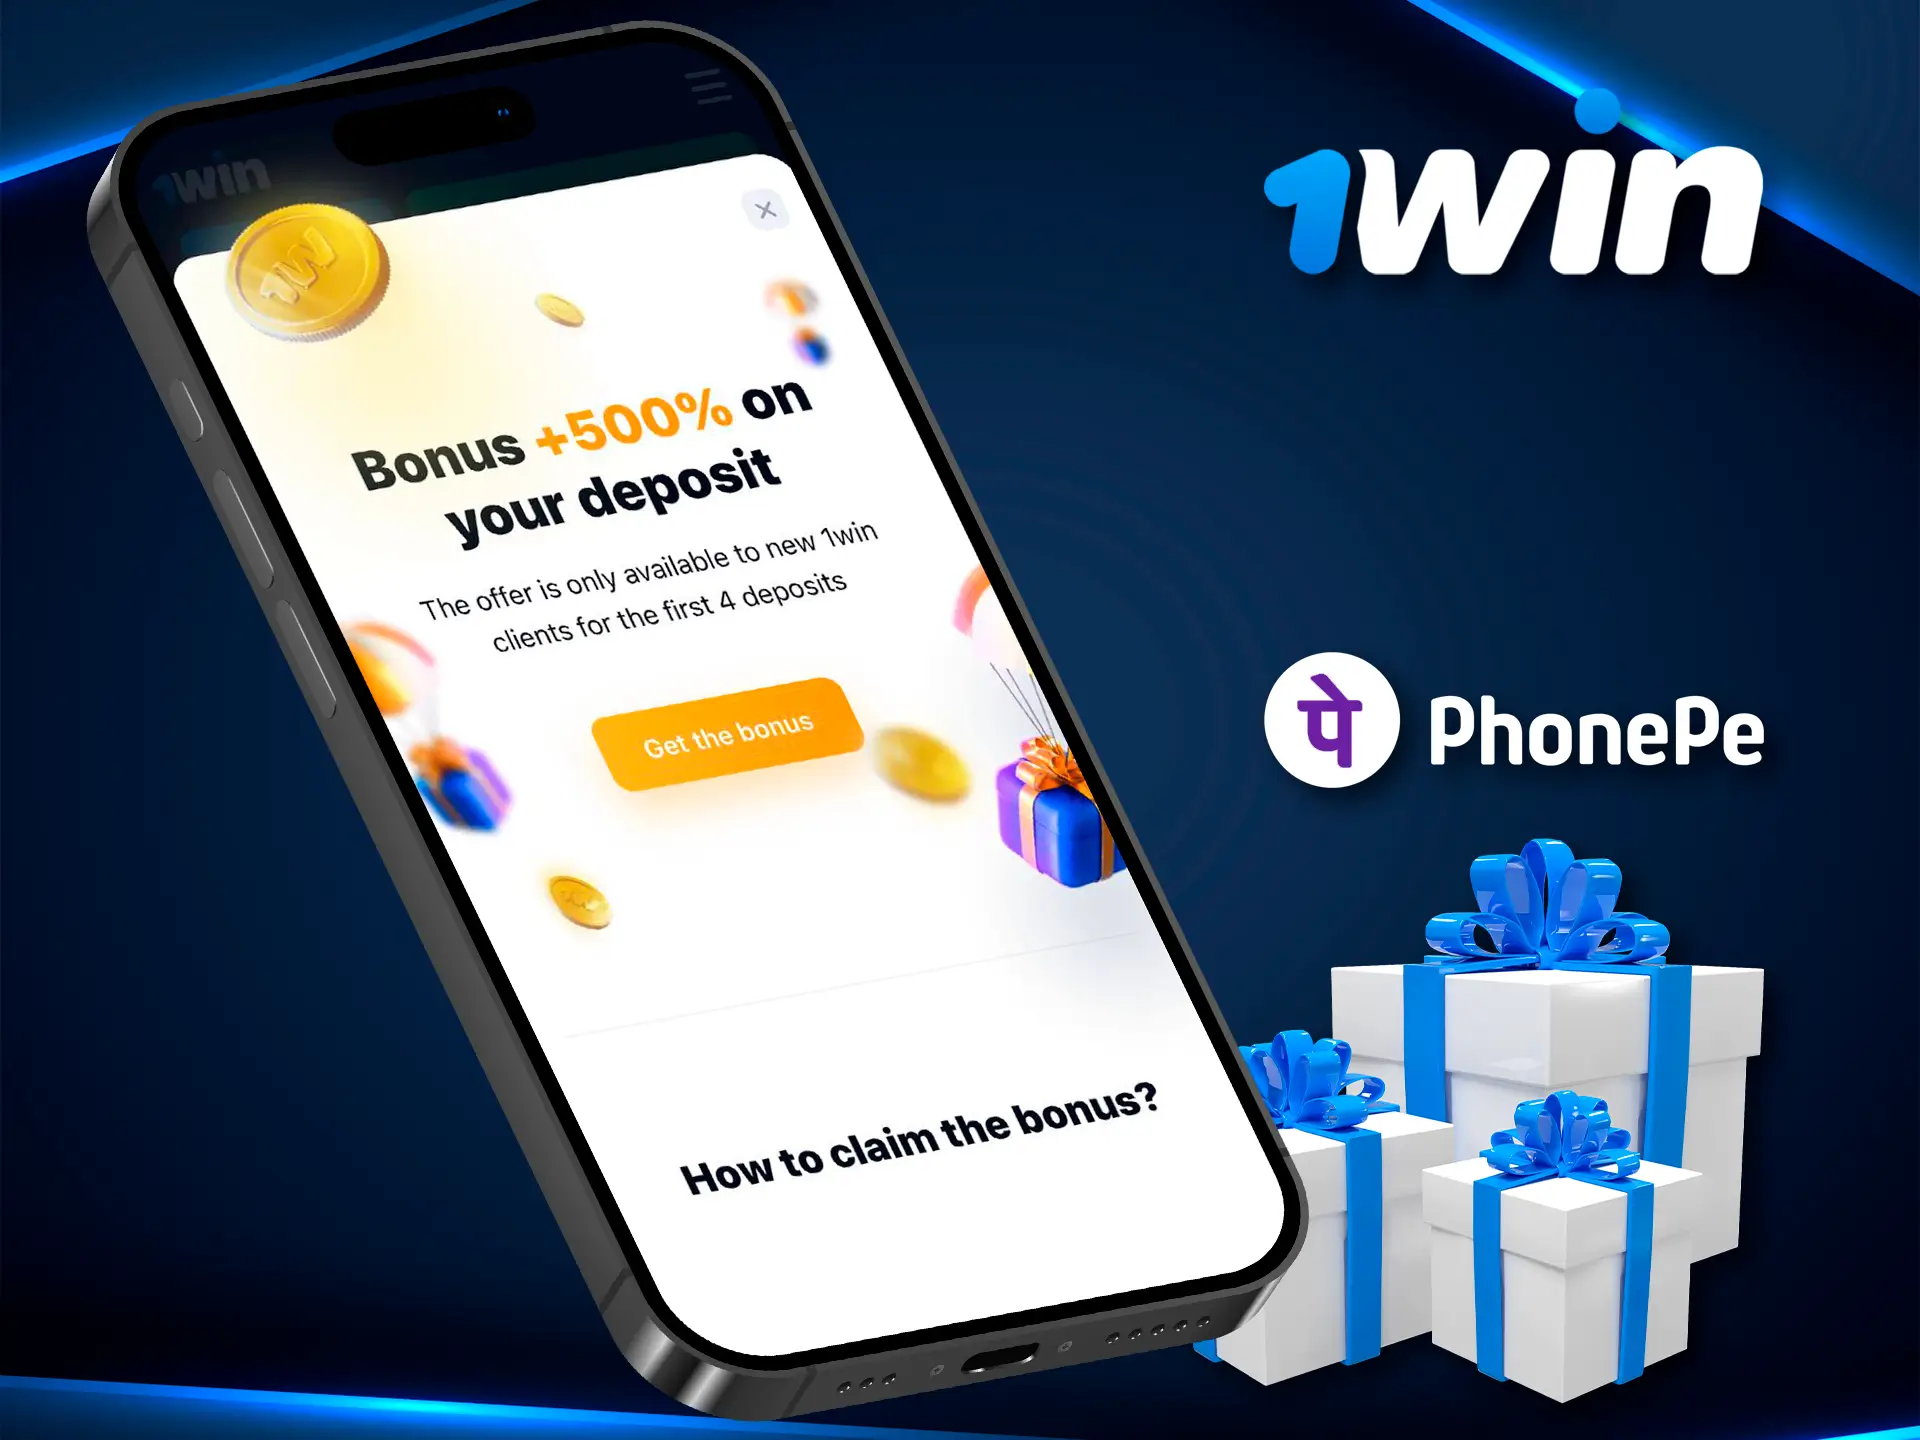 1Win is a great opportunity and excellent customer support for customers who fund their accounts via PhonePe.